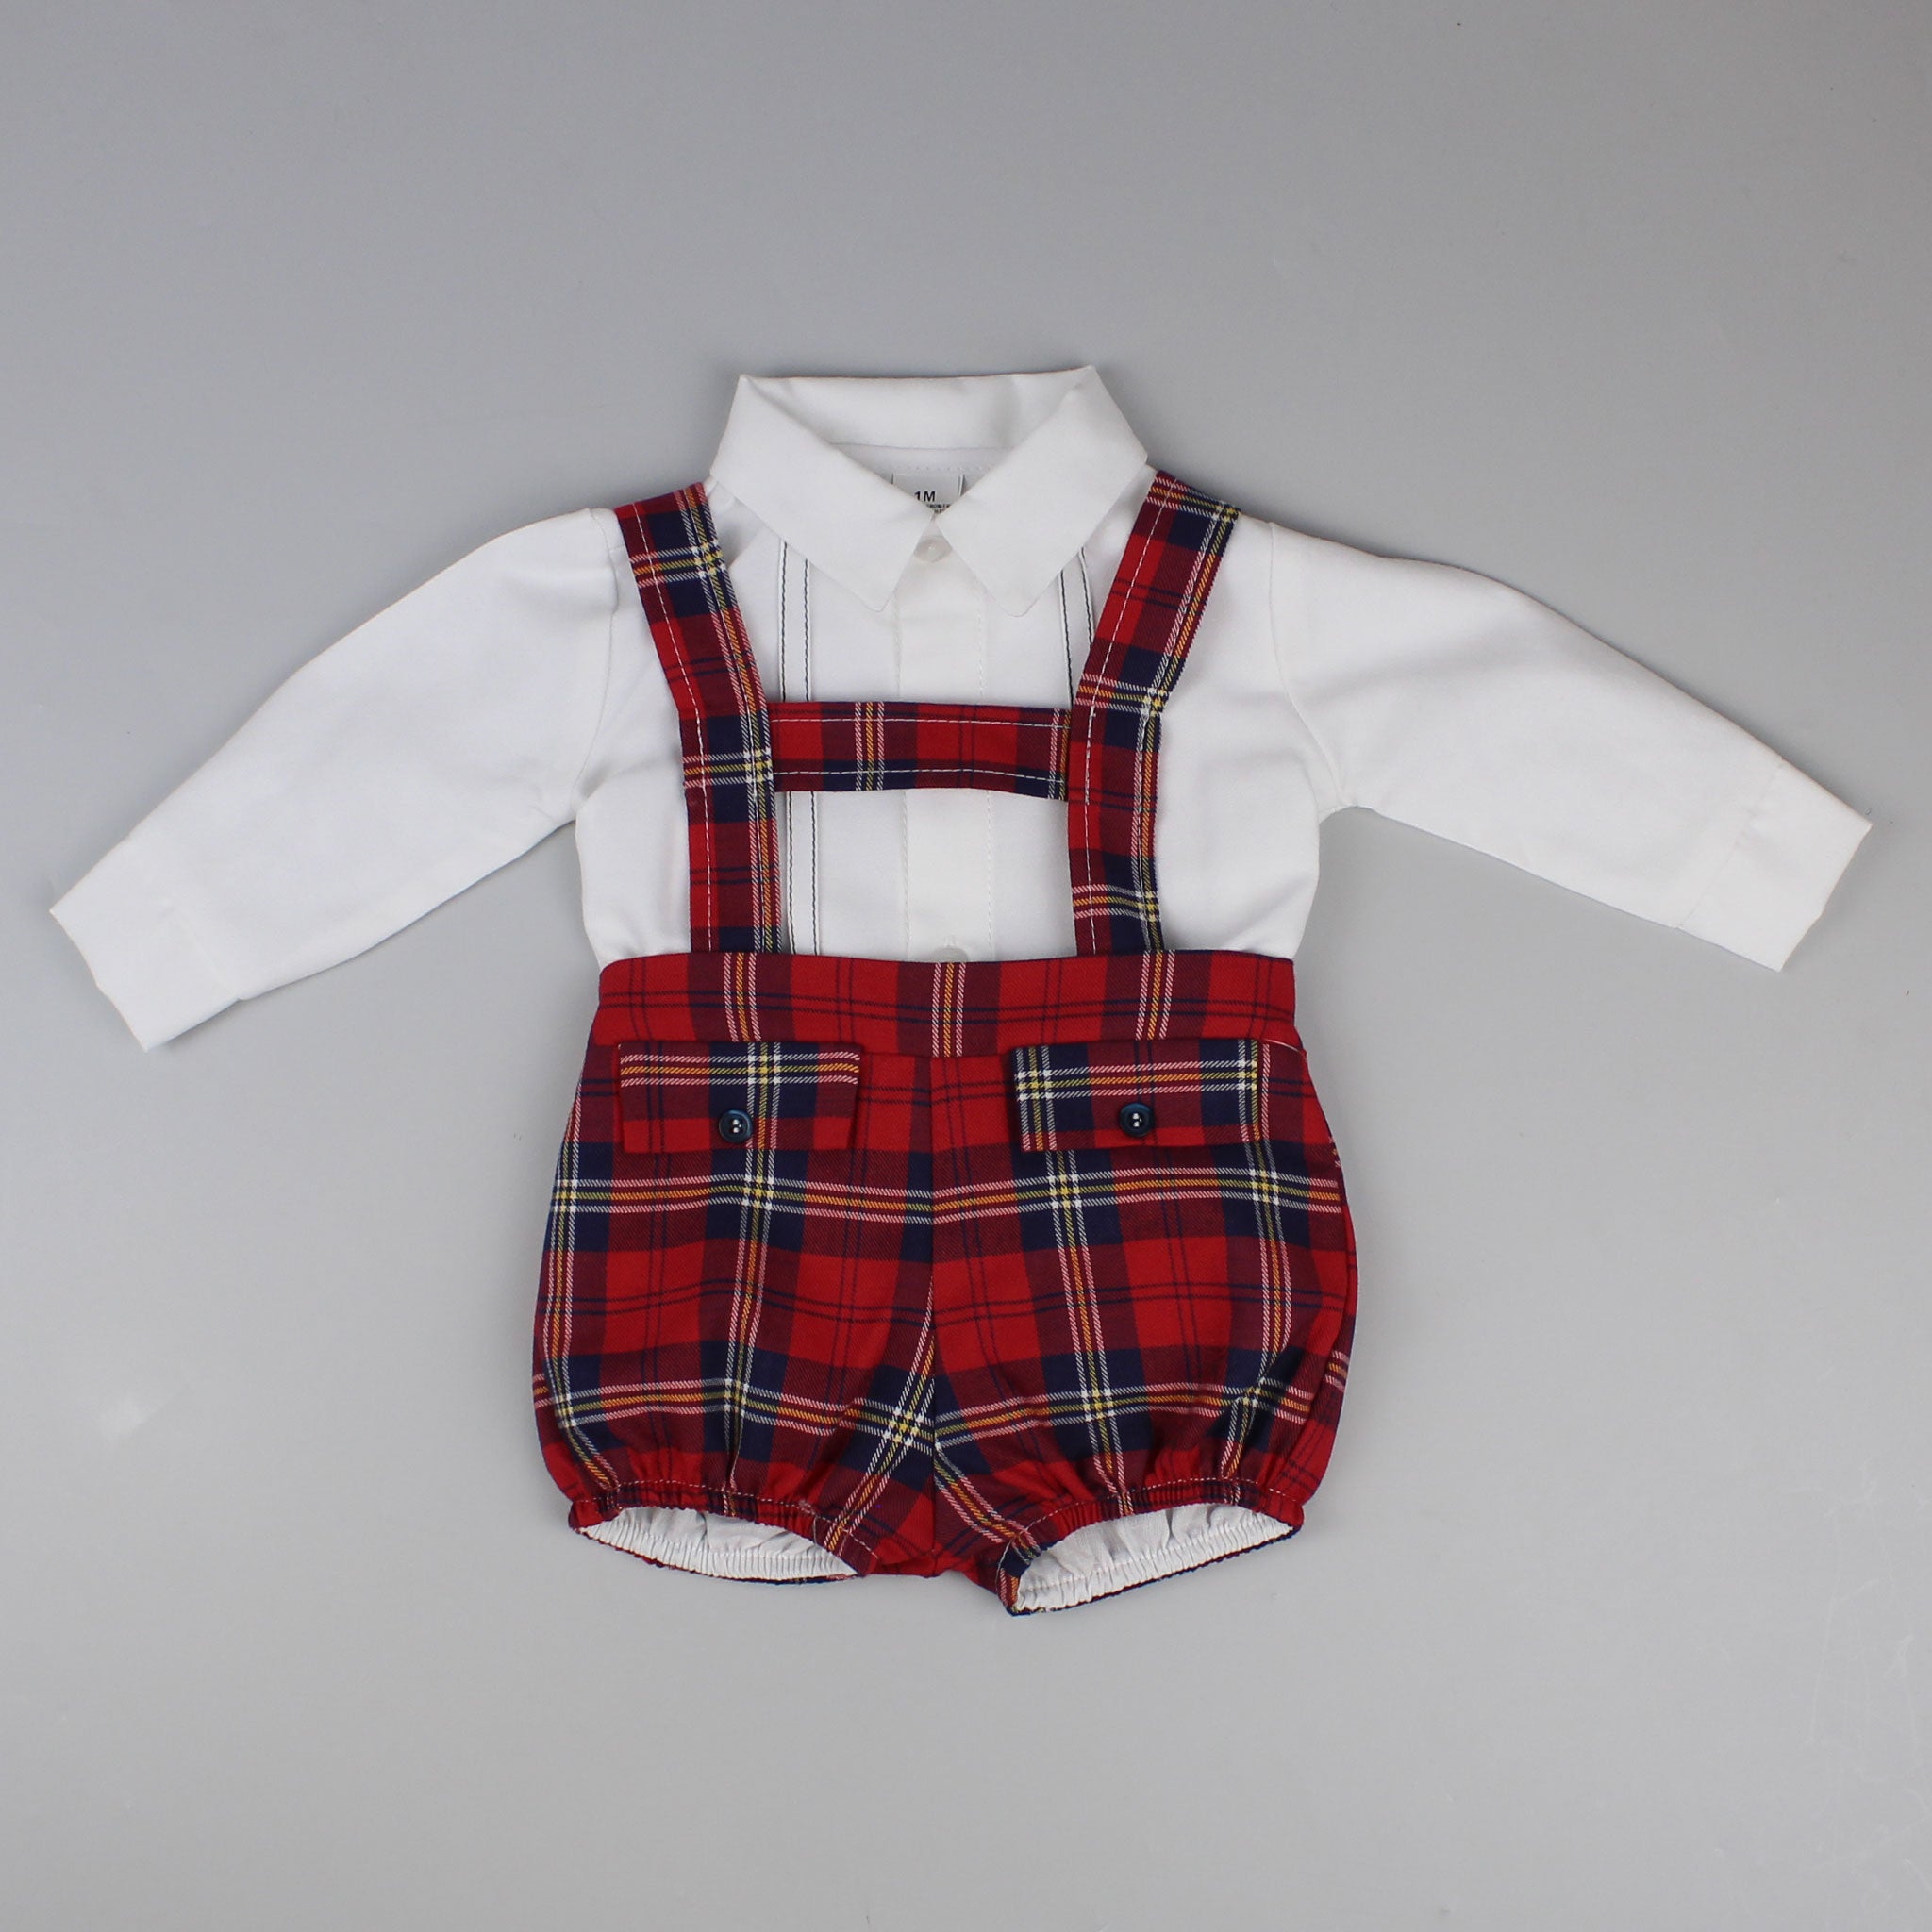 baby boys traditional tartan outfit with braces and white shirt